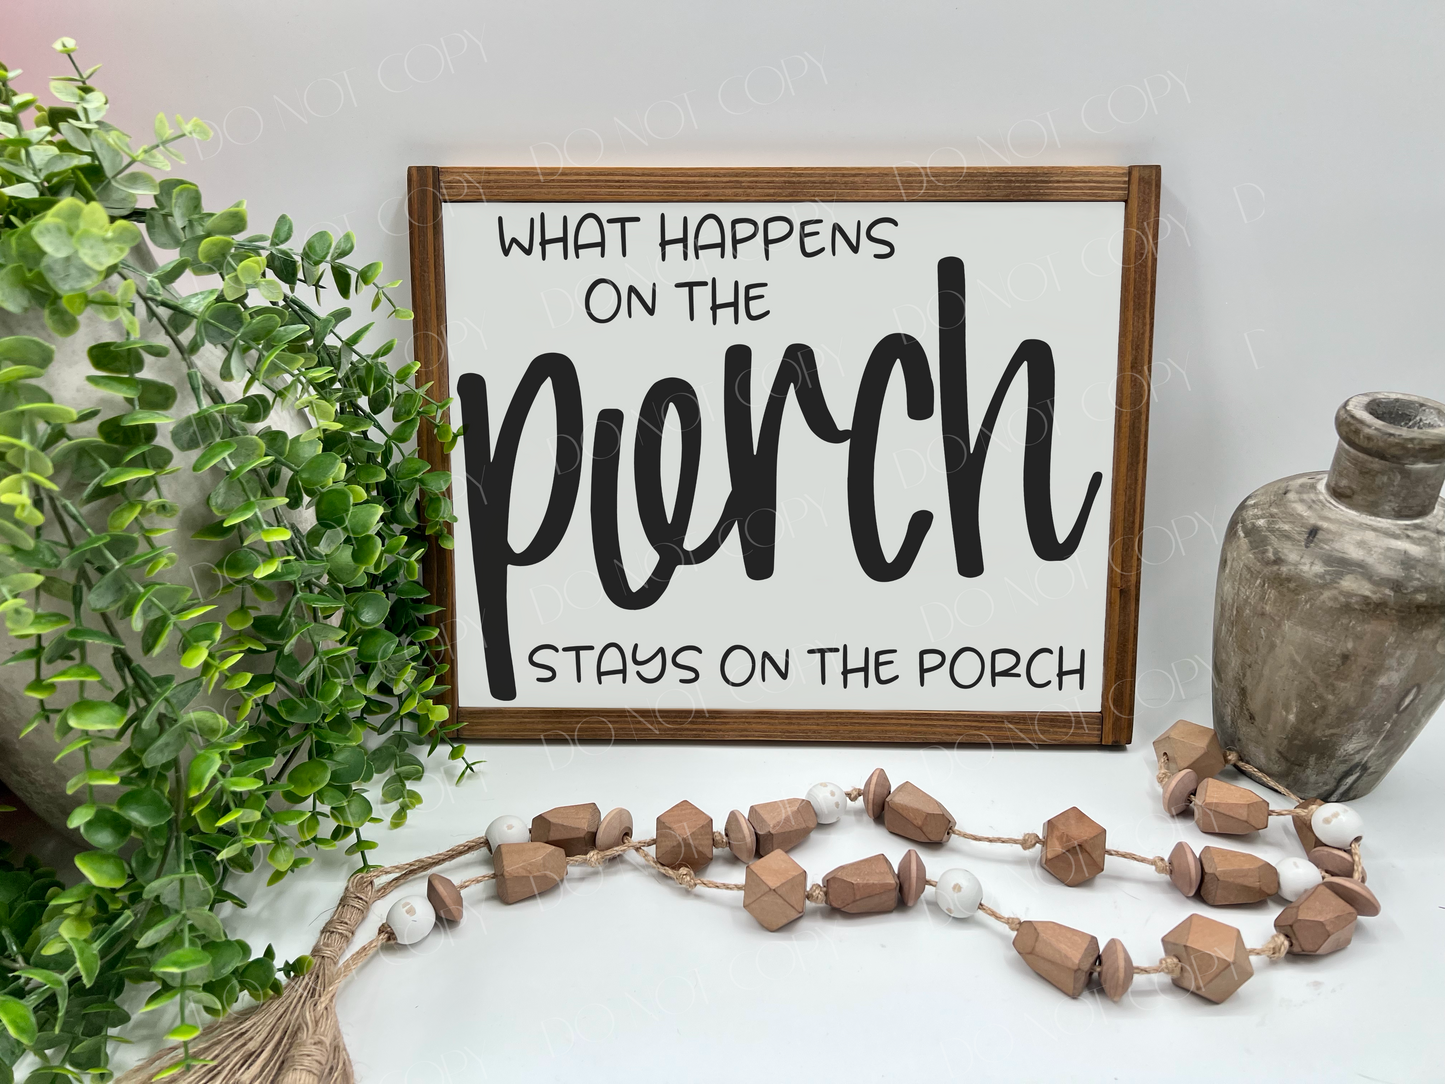 What Happens On The Porch Stays On The Porch - White/Thick/Kona - Wood Sign